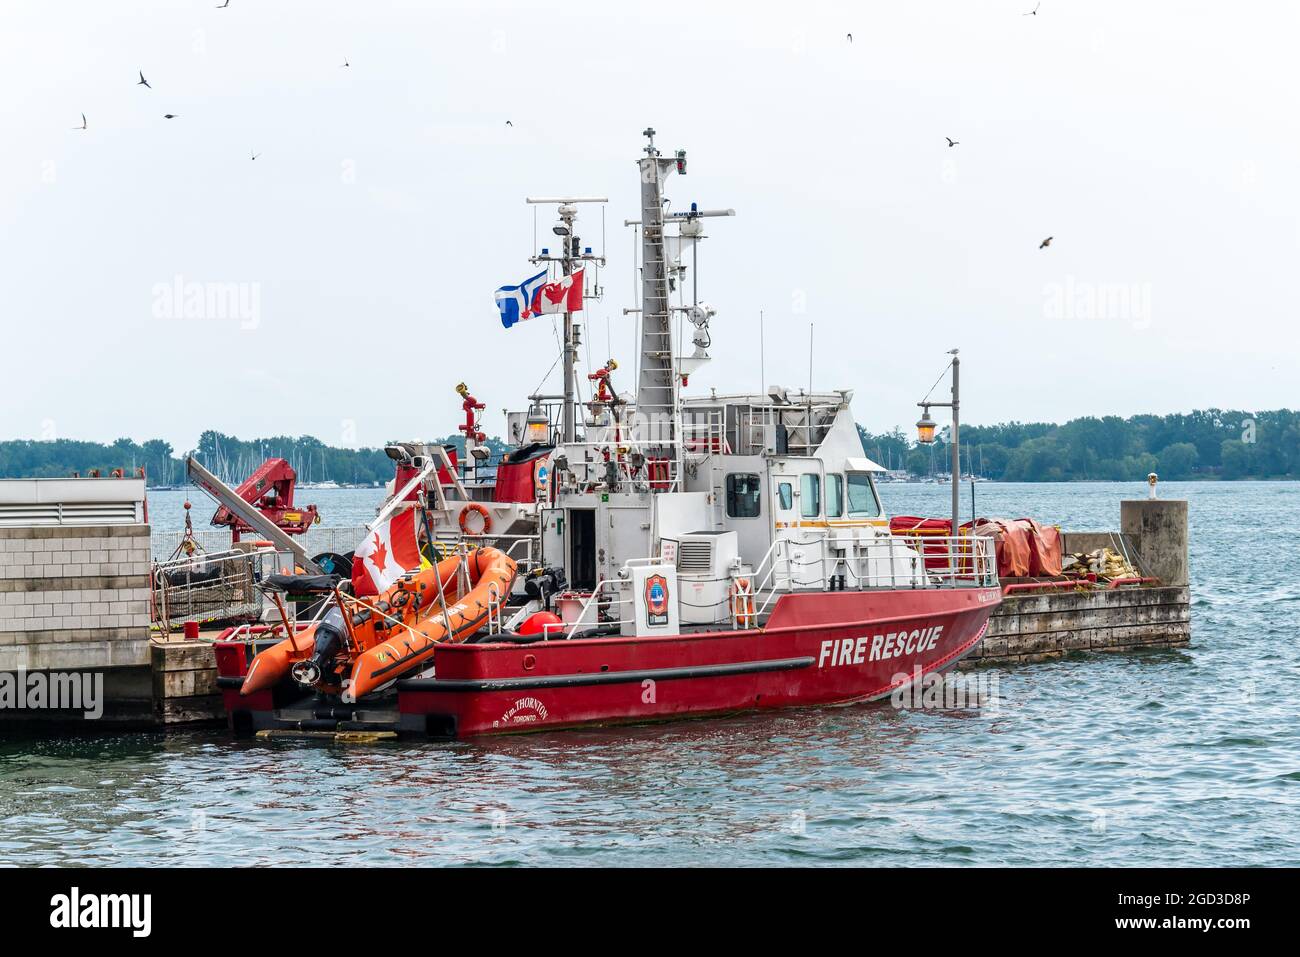 Firefighter ship named Wm. Thornton of the Emergency Service in Toronto city, Canada. The vehicle is moored in Lake Ontario in the city waterfront Stock Photo